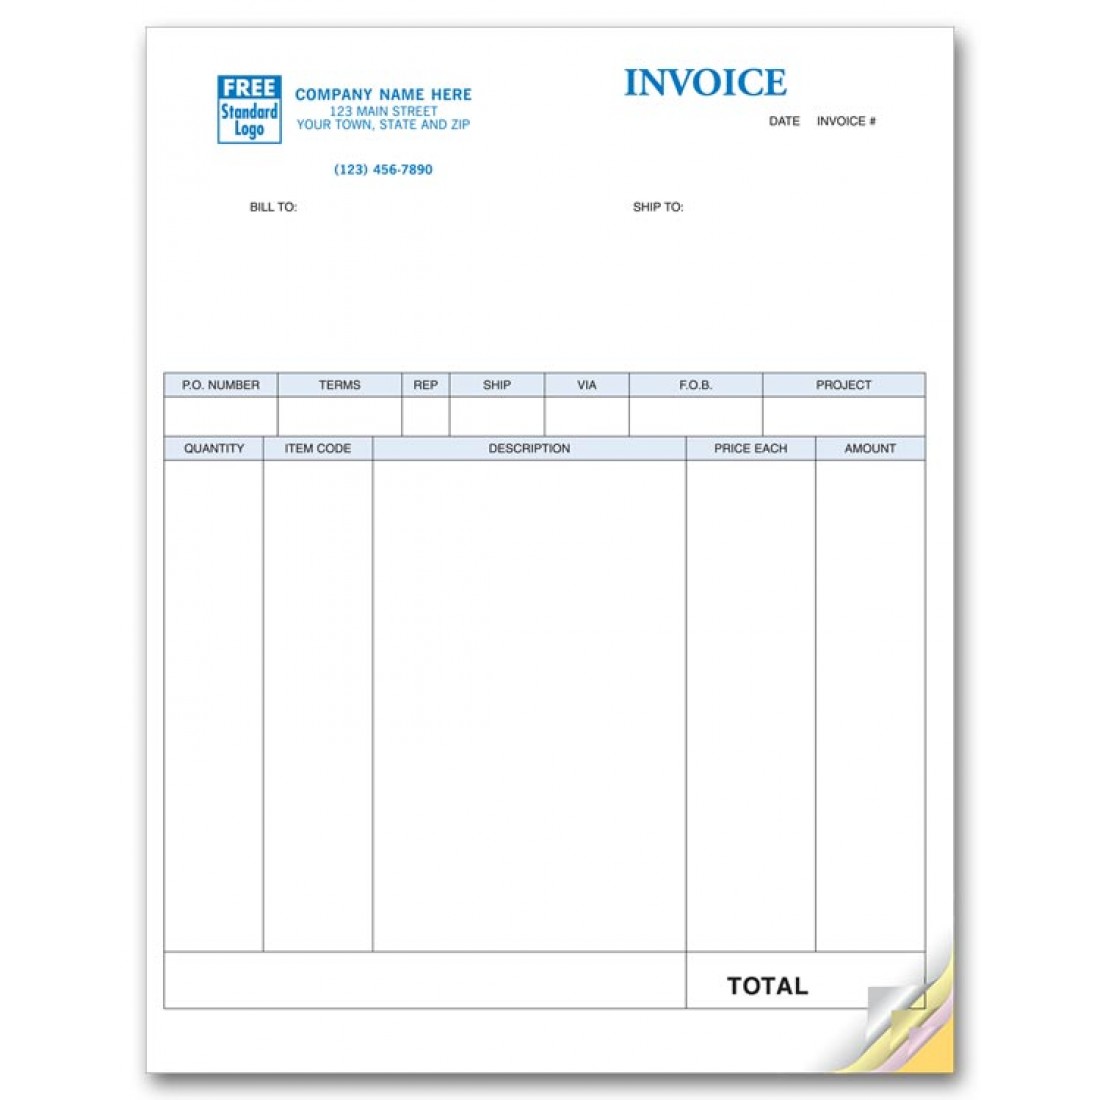 create a quick invoice for an item